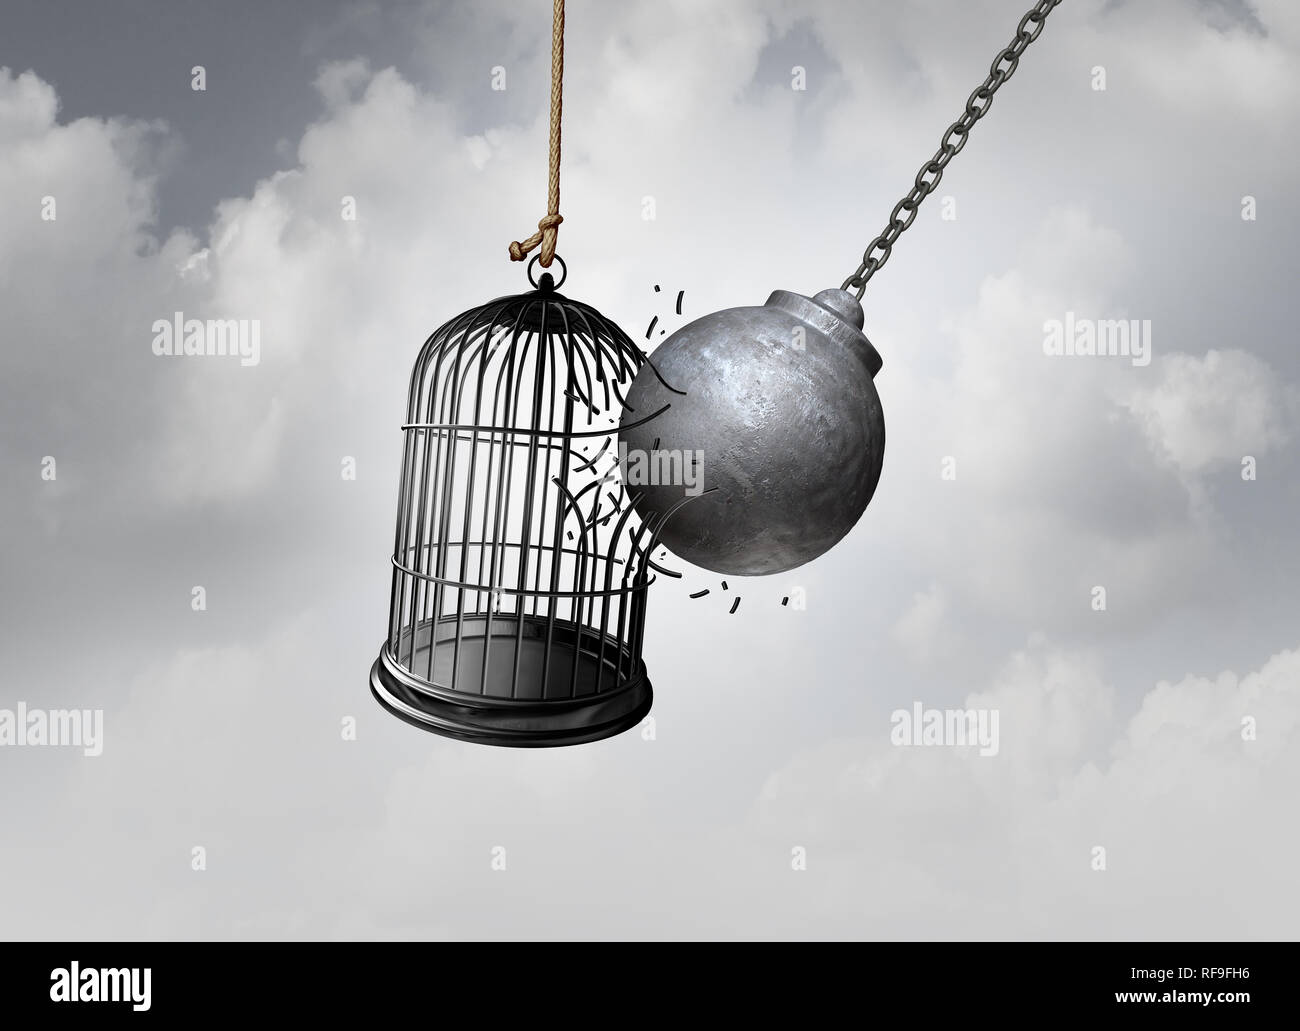 Freedom cage and break Free concept as a wrecking ball liberating a birdcage breaking open a prison as an abstract idea of escaping an addiction. Stock Photo